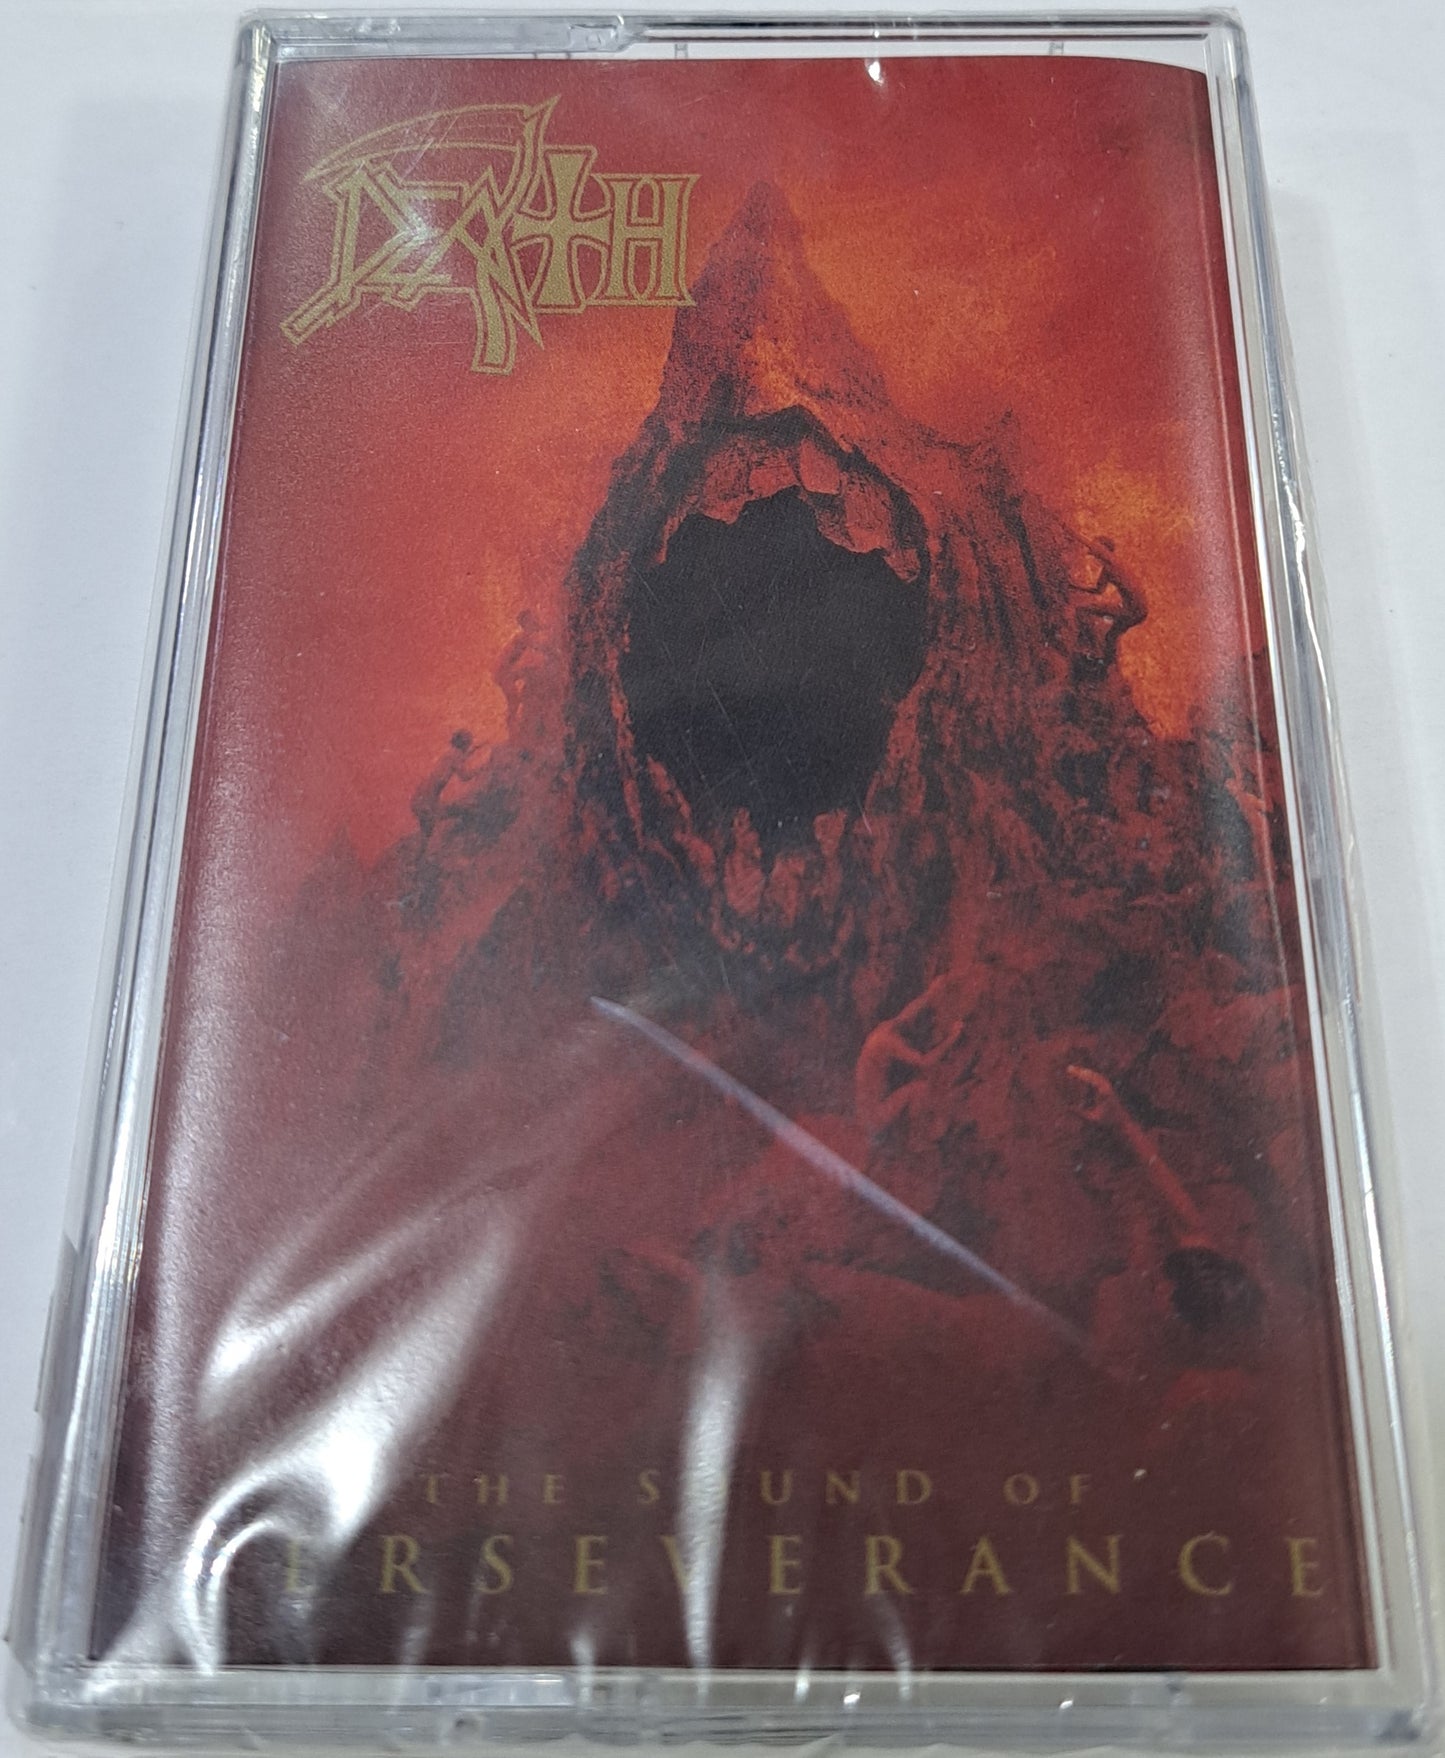 DEATH - THE SOUND OF PERSEVERANCE CASSETTE